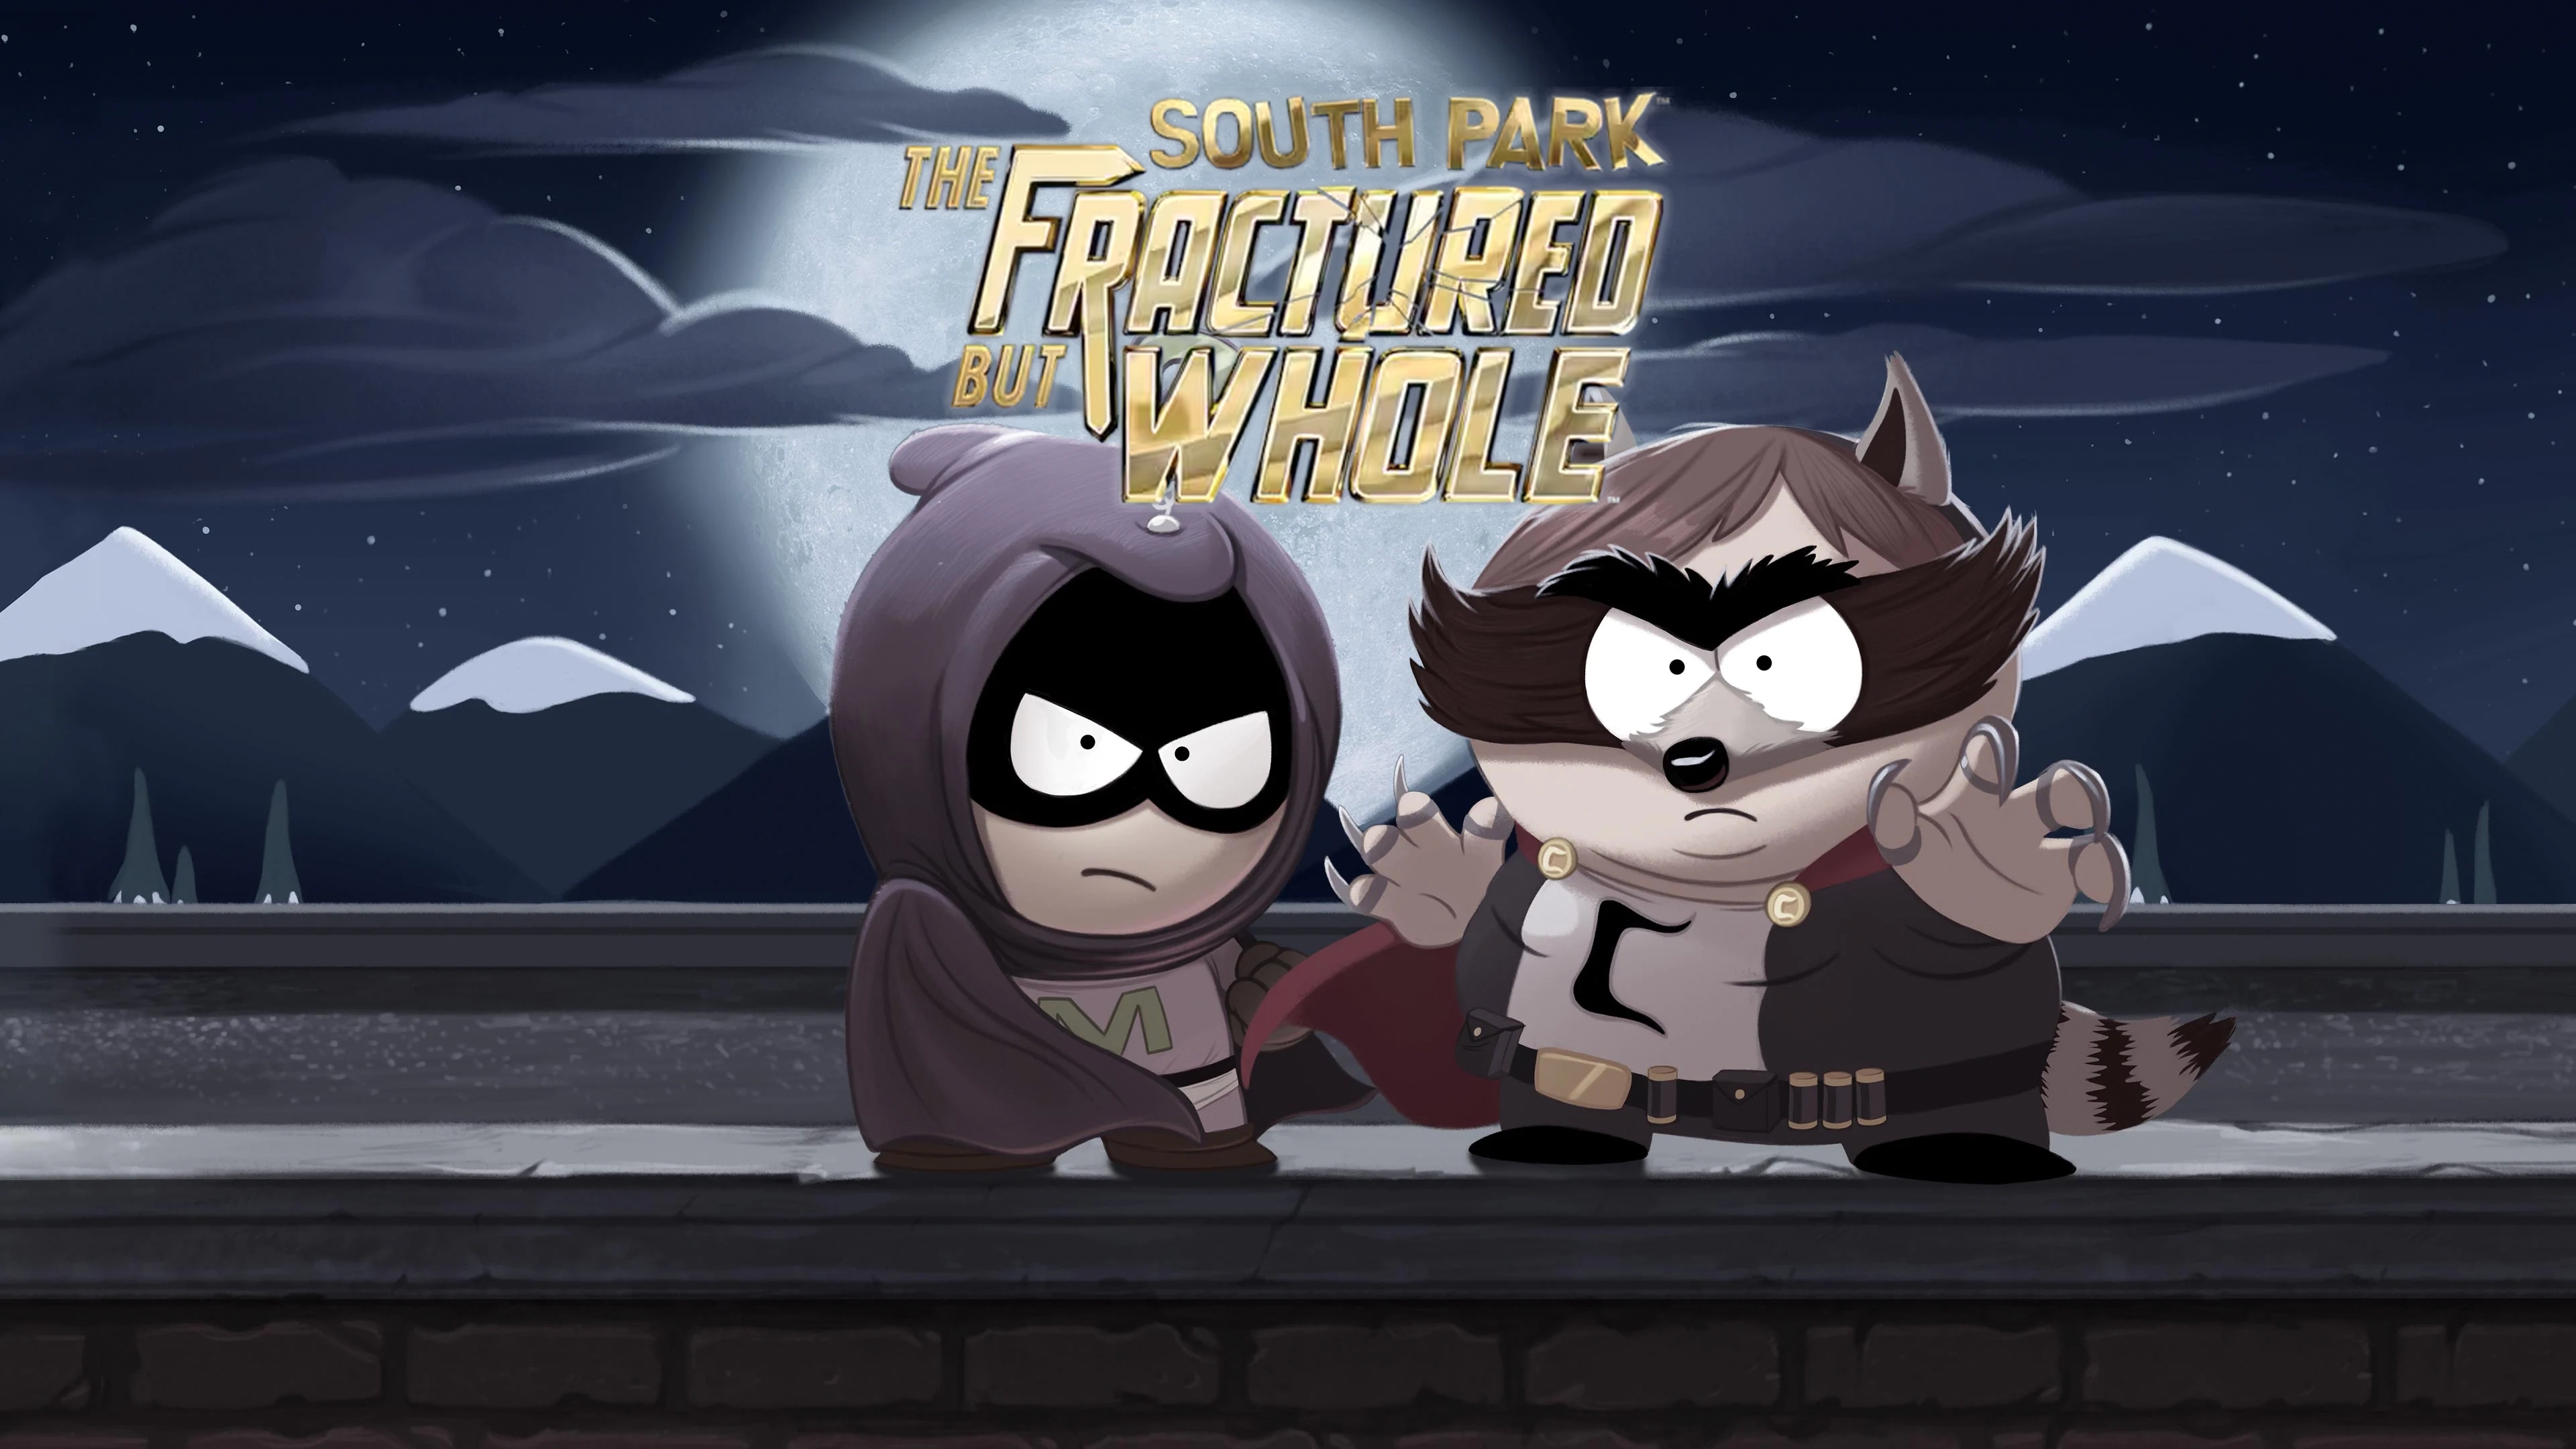 South park the fractured but whole купить ключ steam фото 19